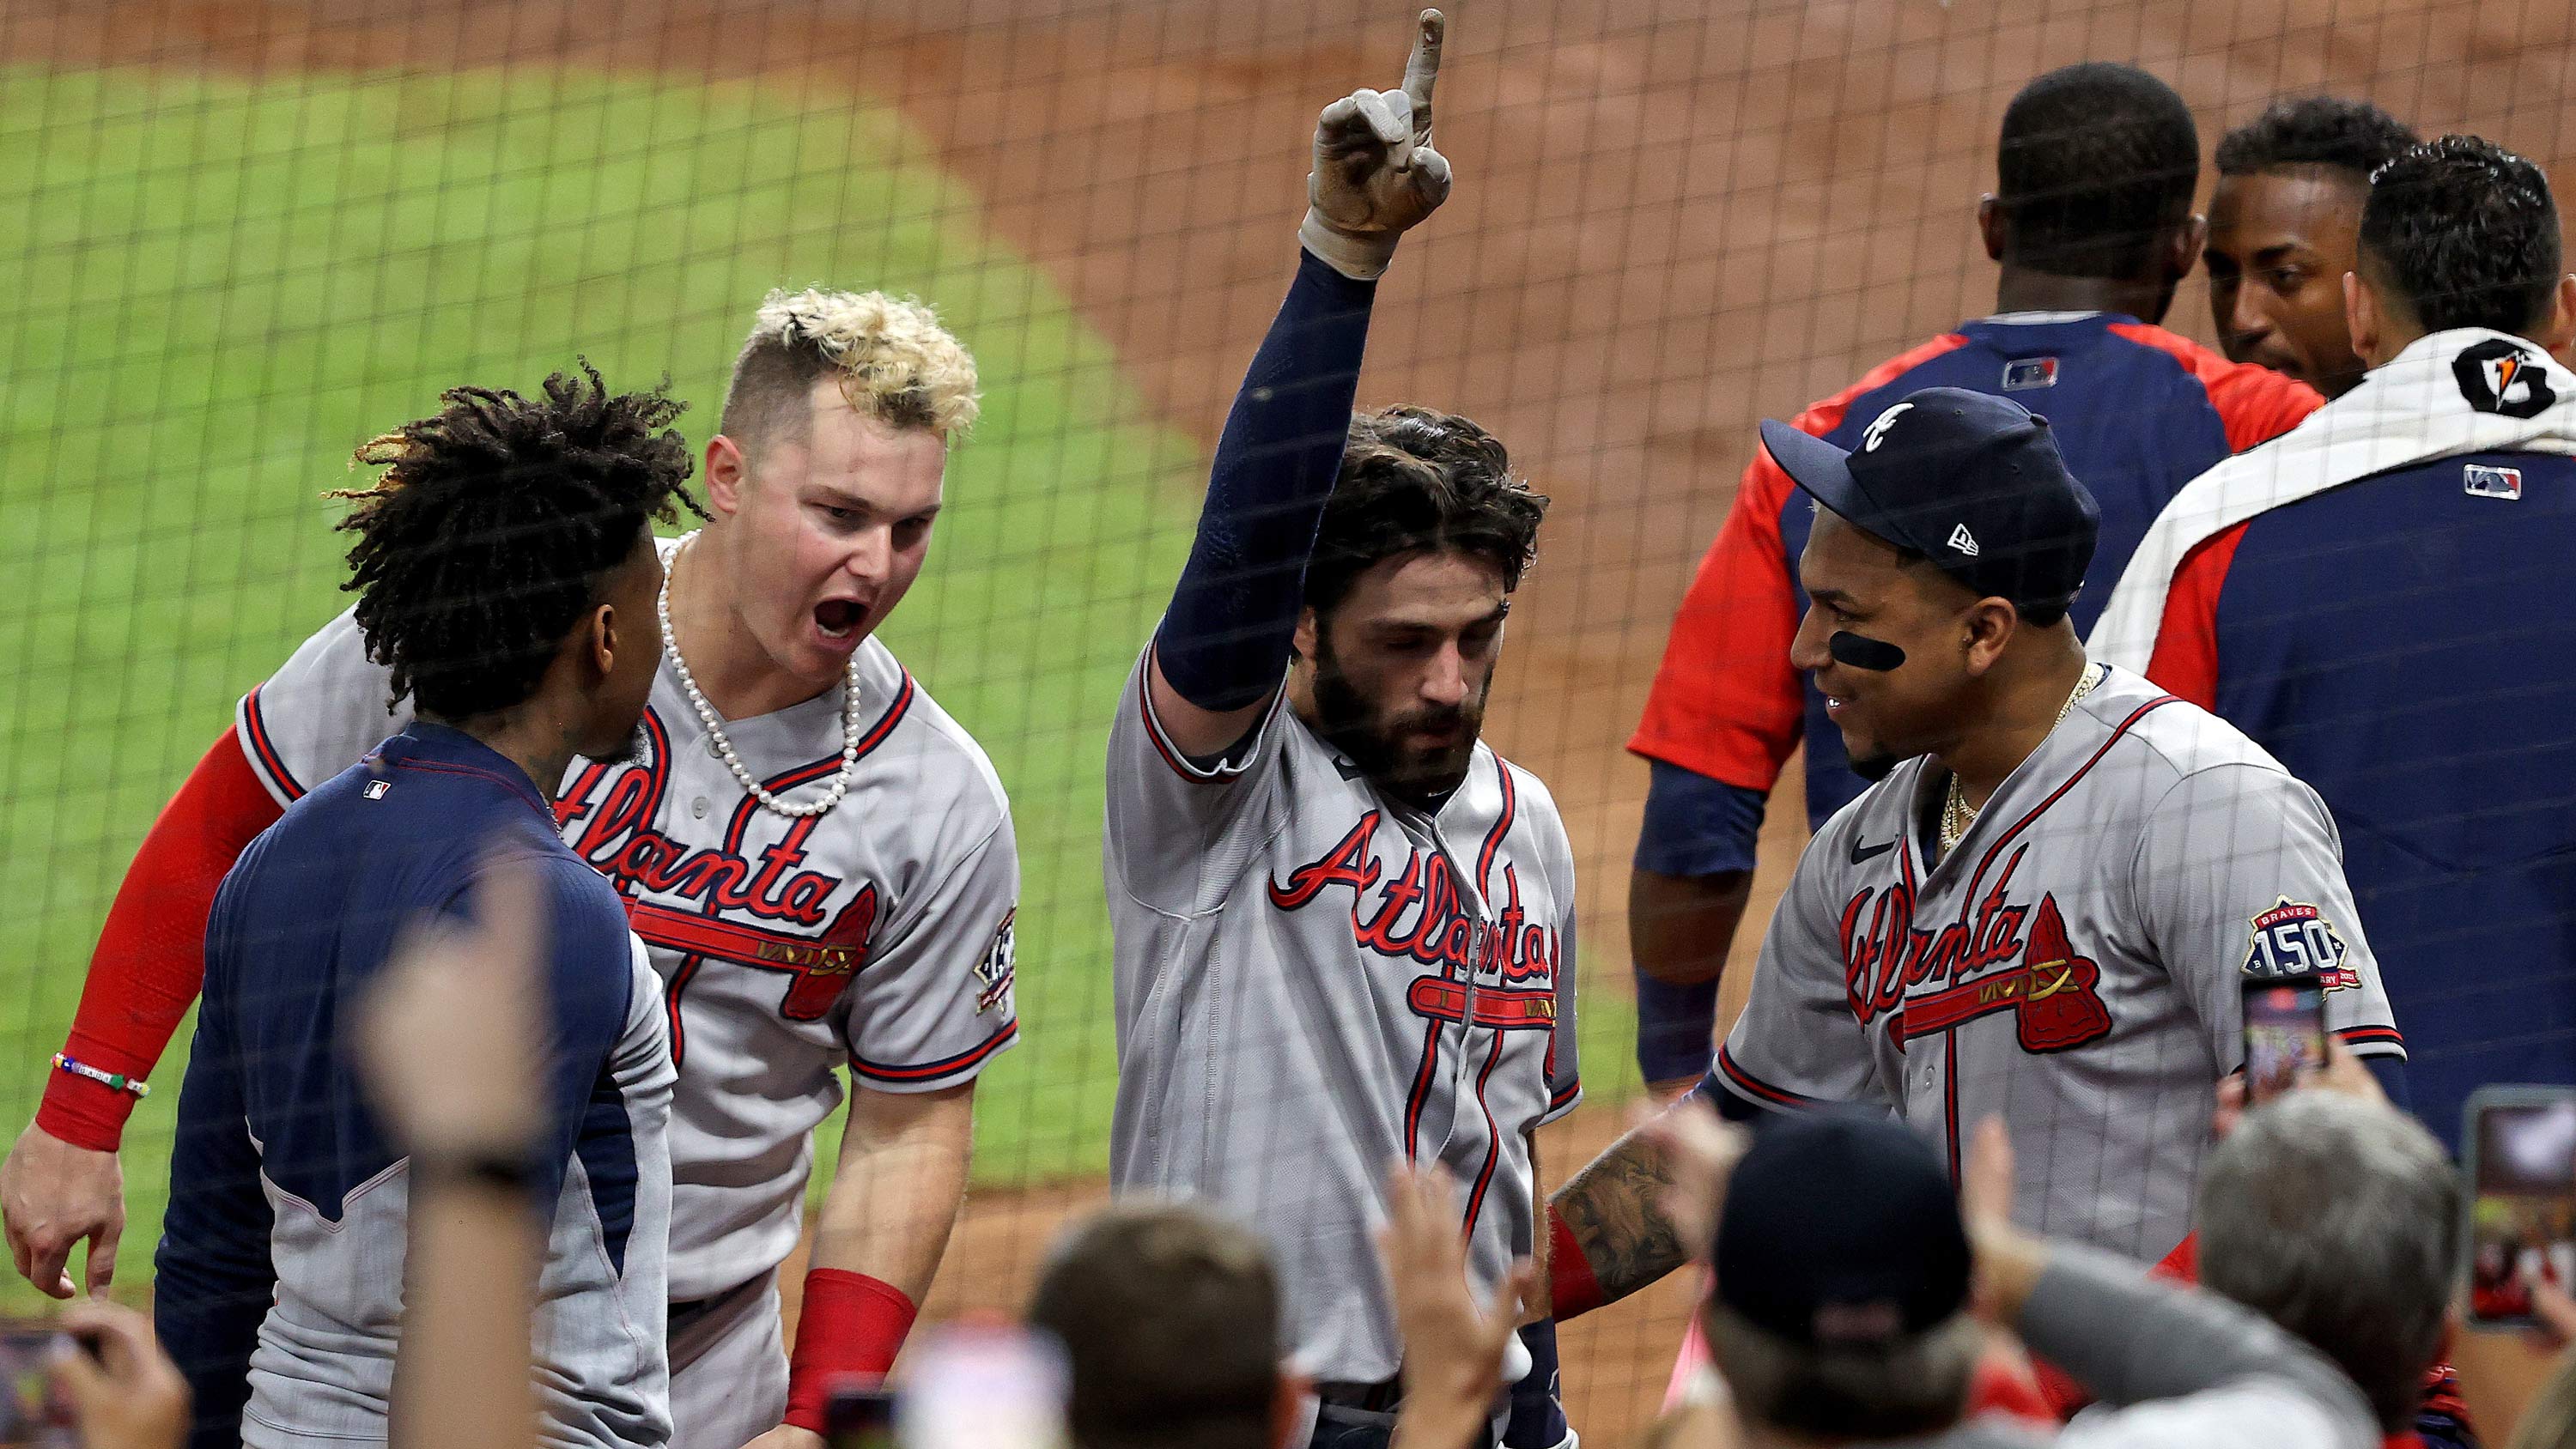 Dansby Swanson, center, of the Braves celebrates after hitting a two run home run during the fifth inning in Game 6.